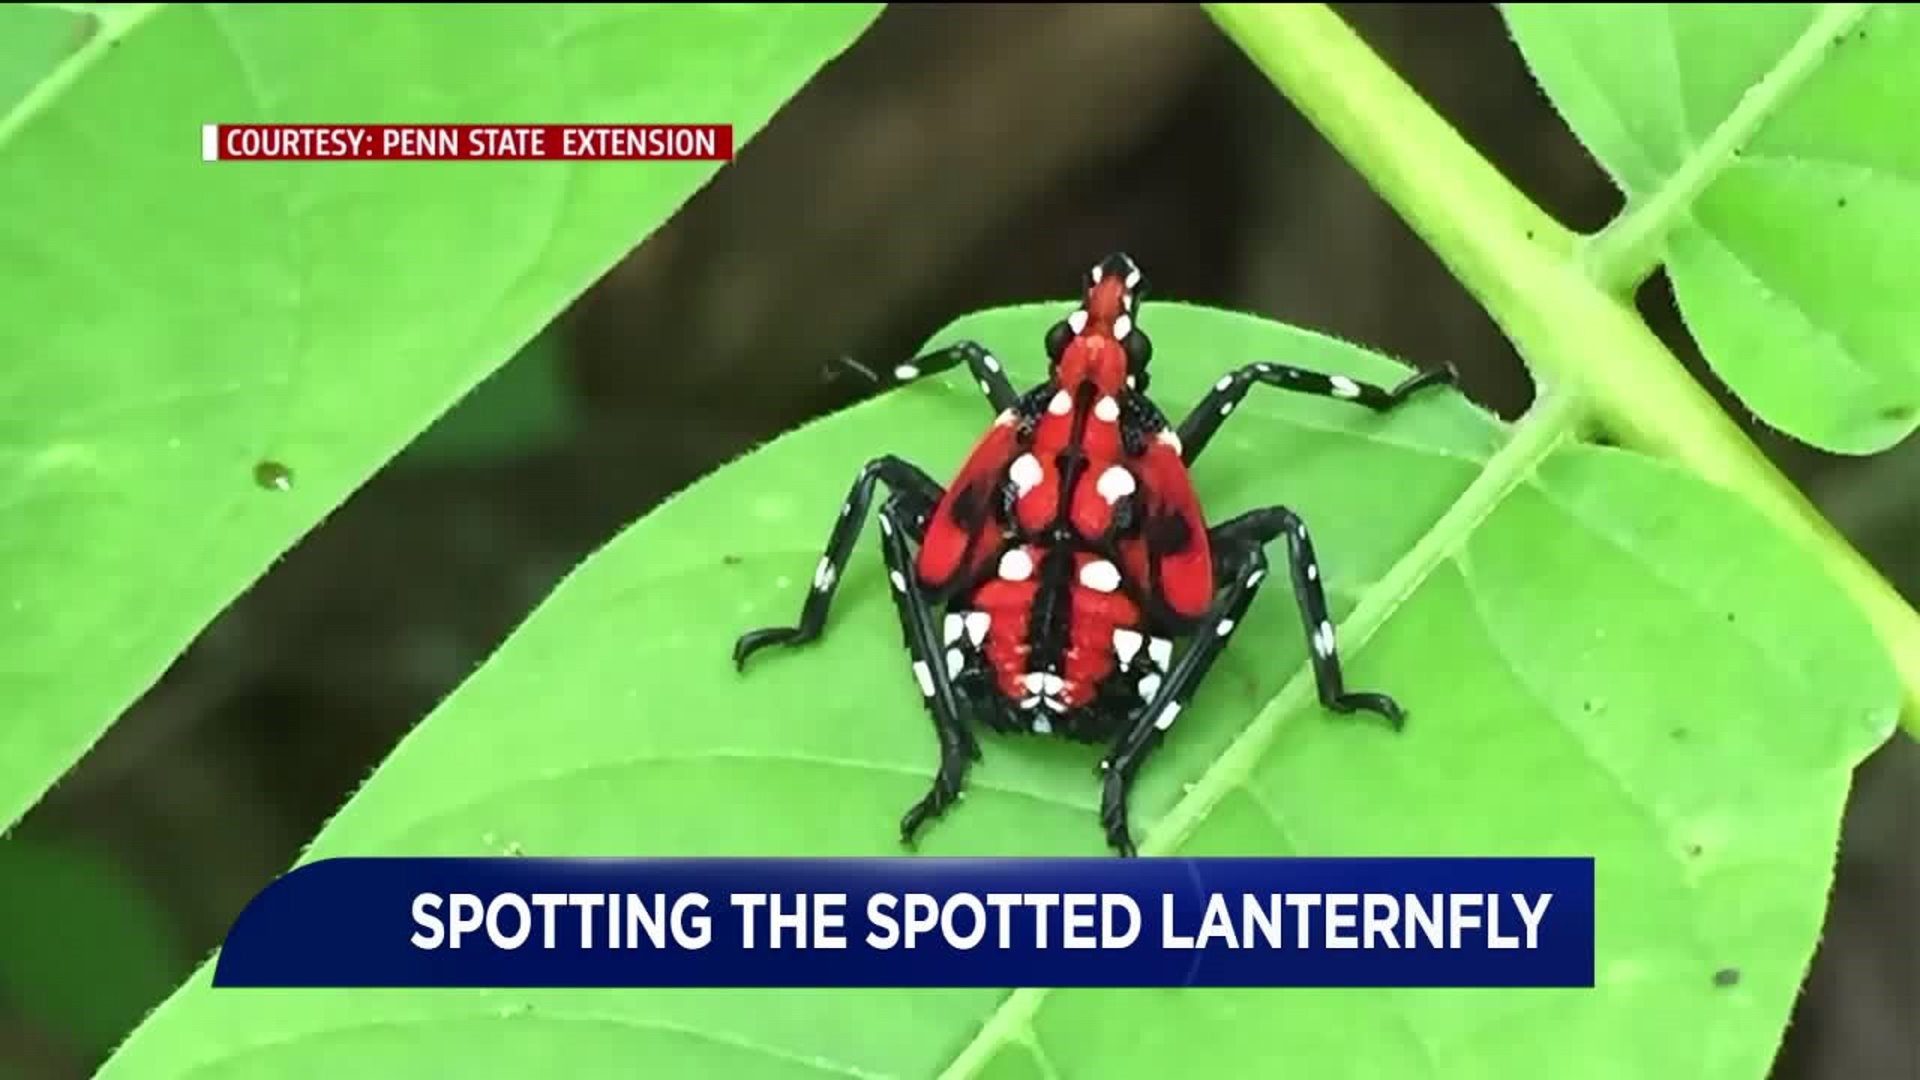 Spotting the Spotted Lanternfly in Pennsylvania